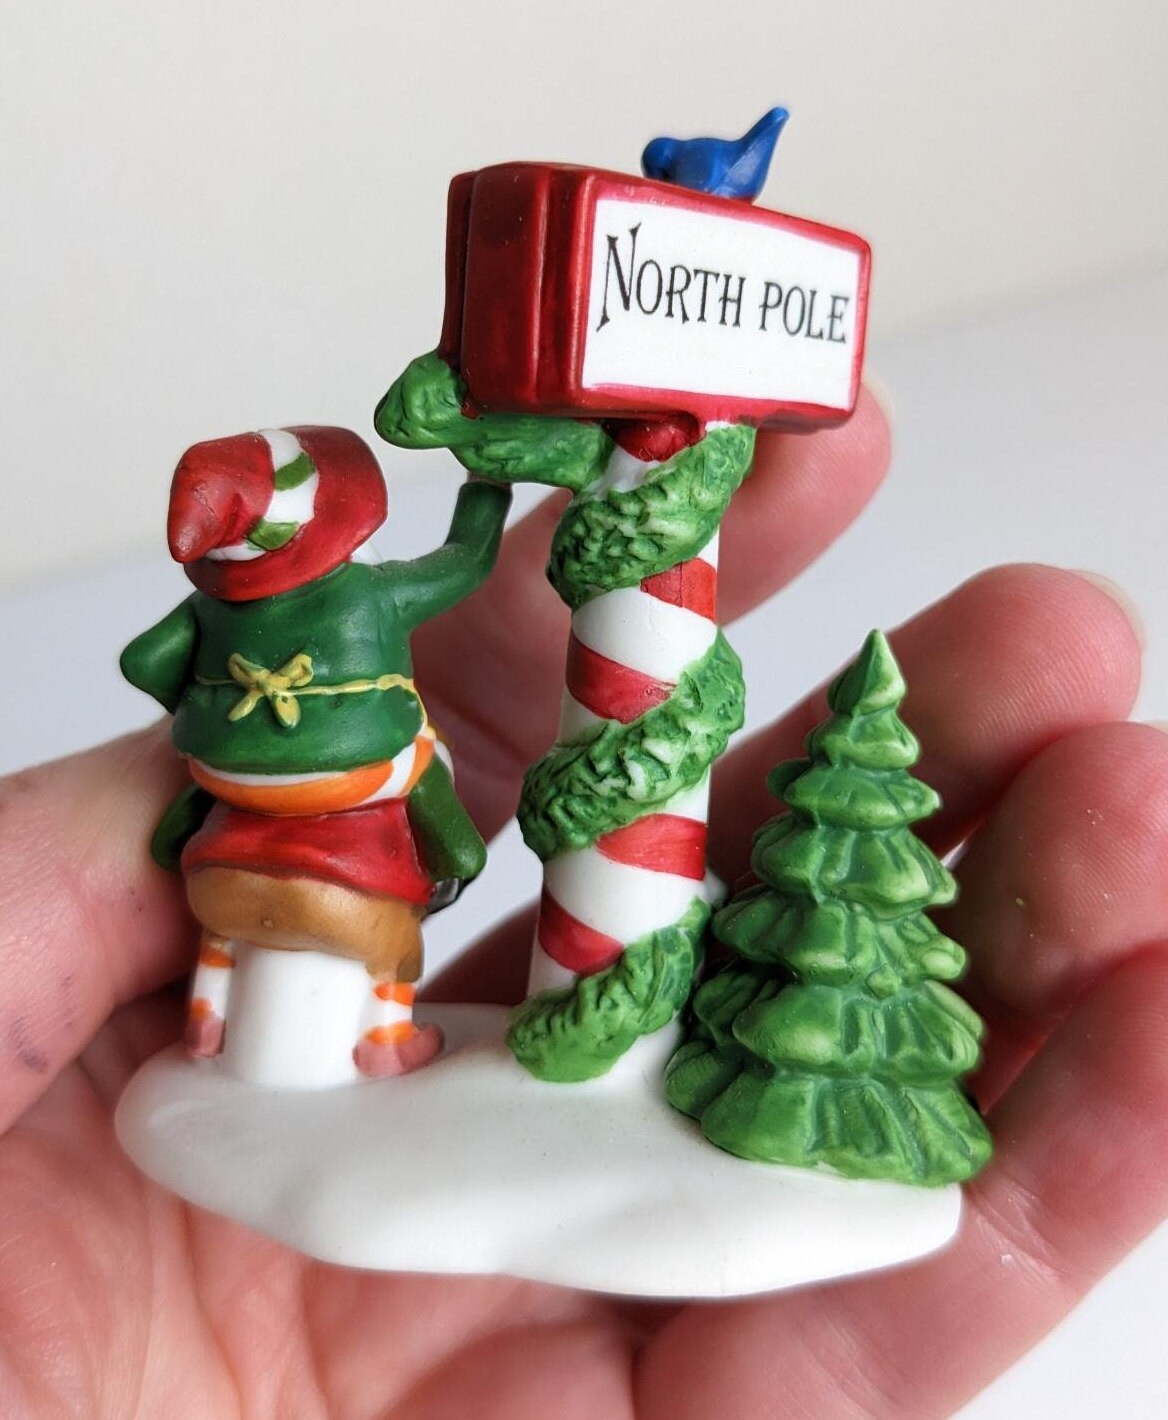 'Trimming The North Pole' Christmas Village Accessories